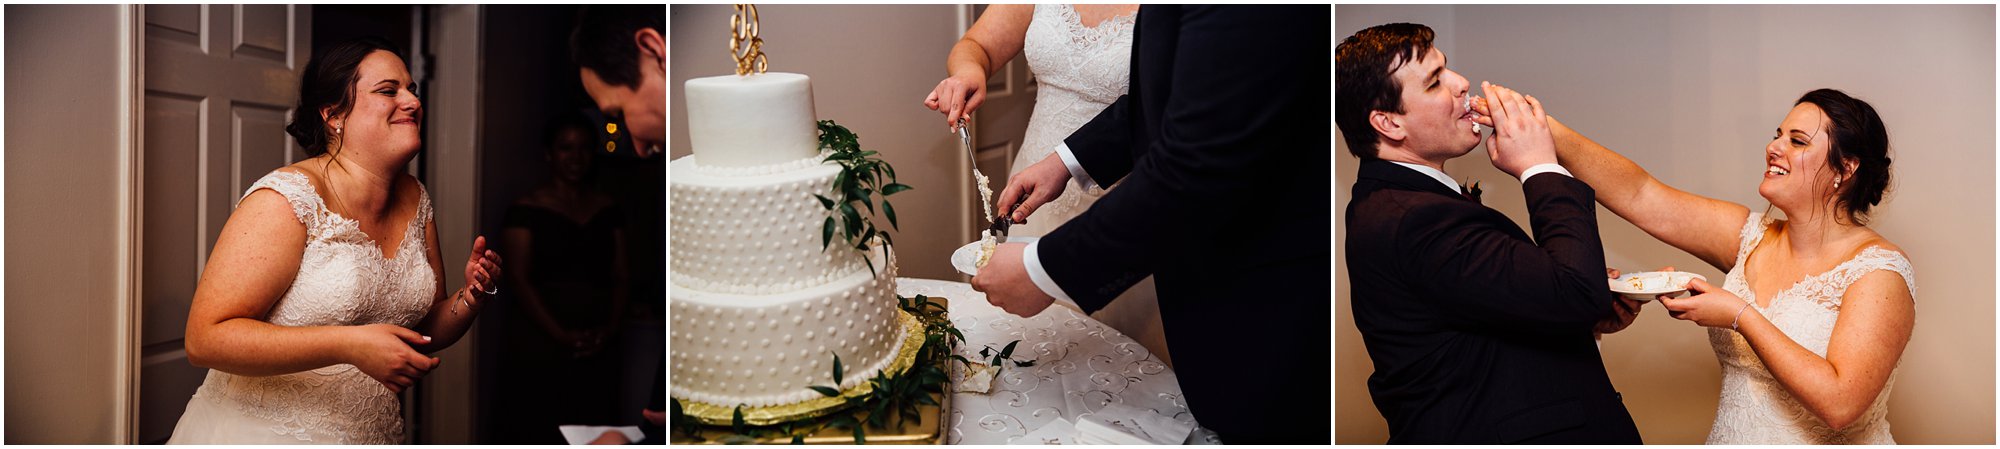 Wedding couple cutting their cake together and laughing